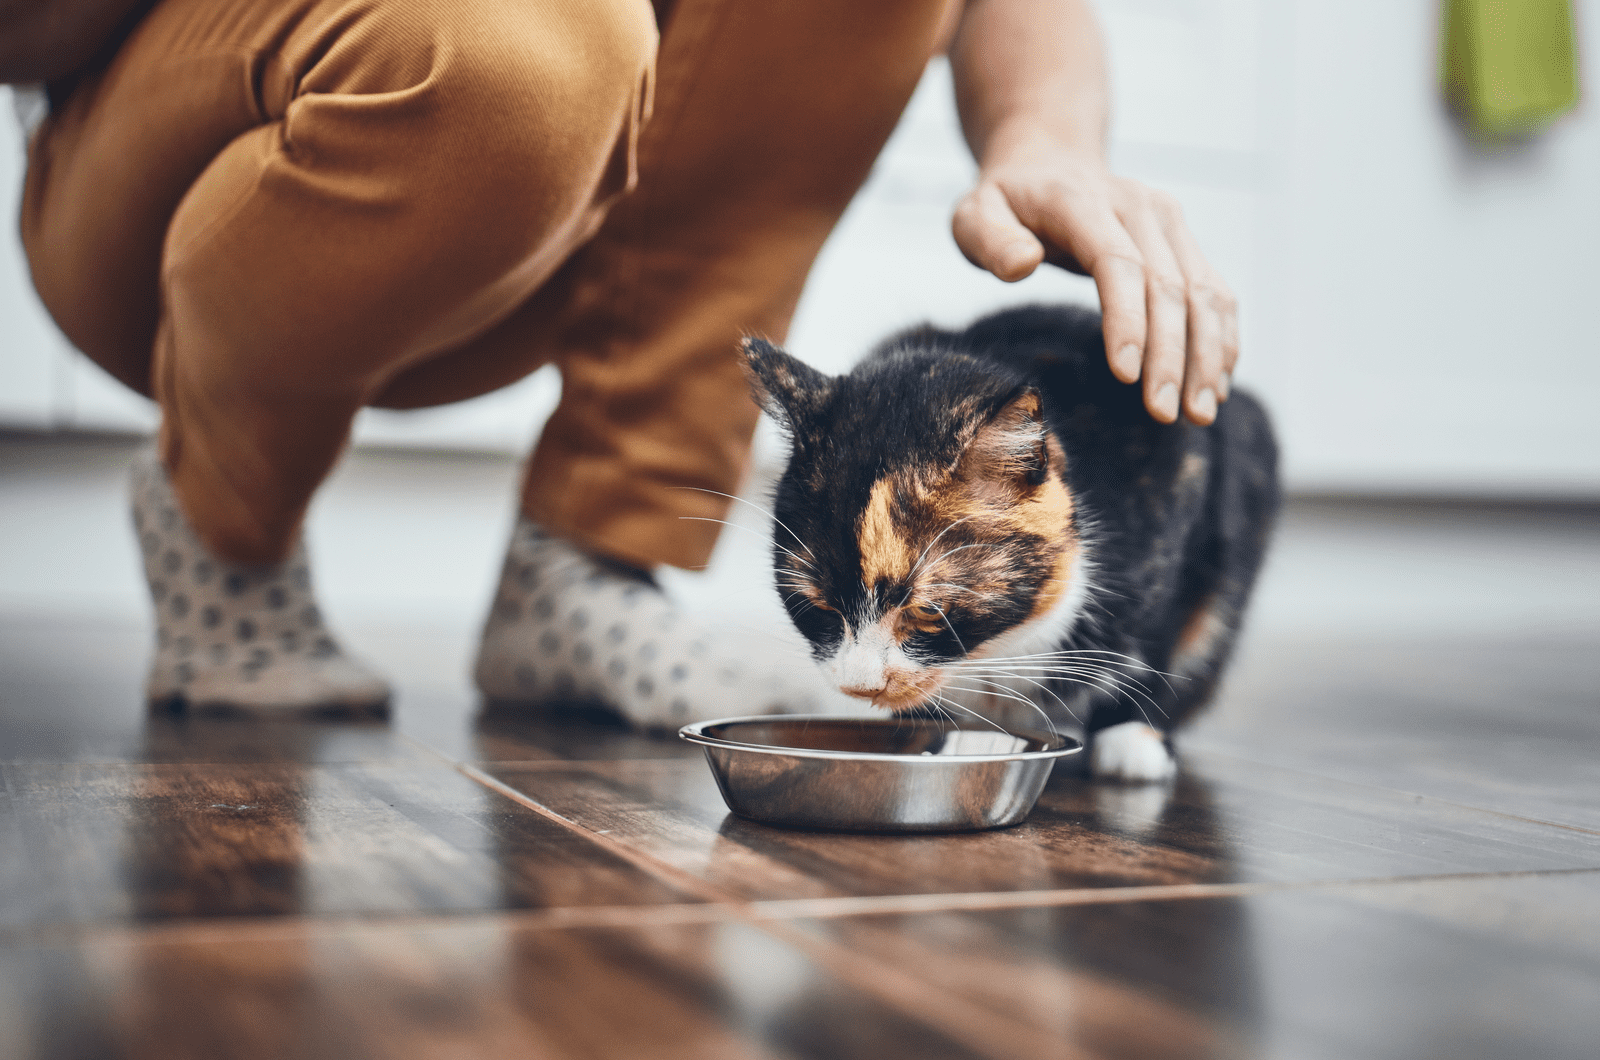 Cute cat eating from bowl at home kitchen.